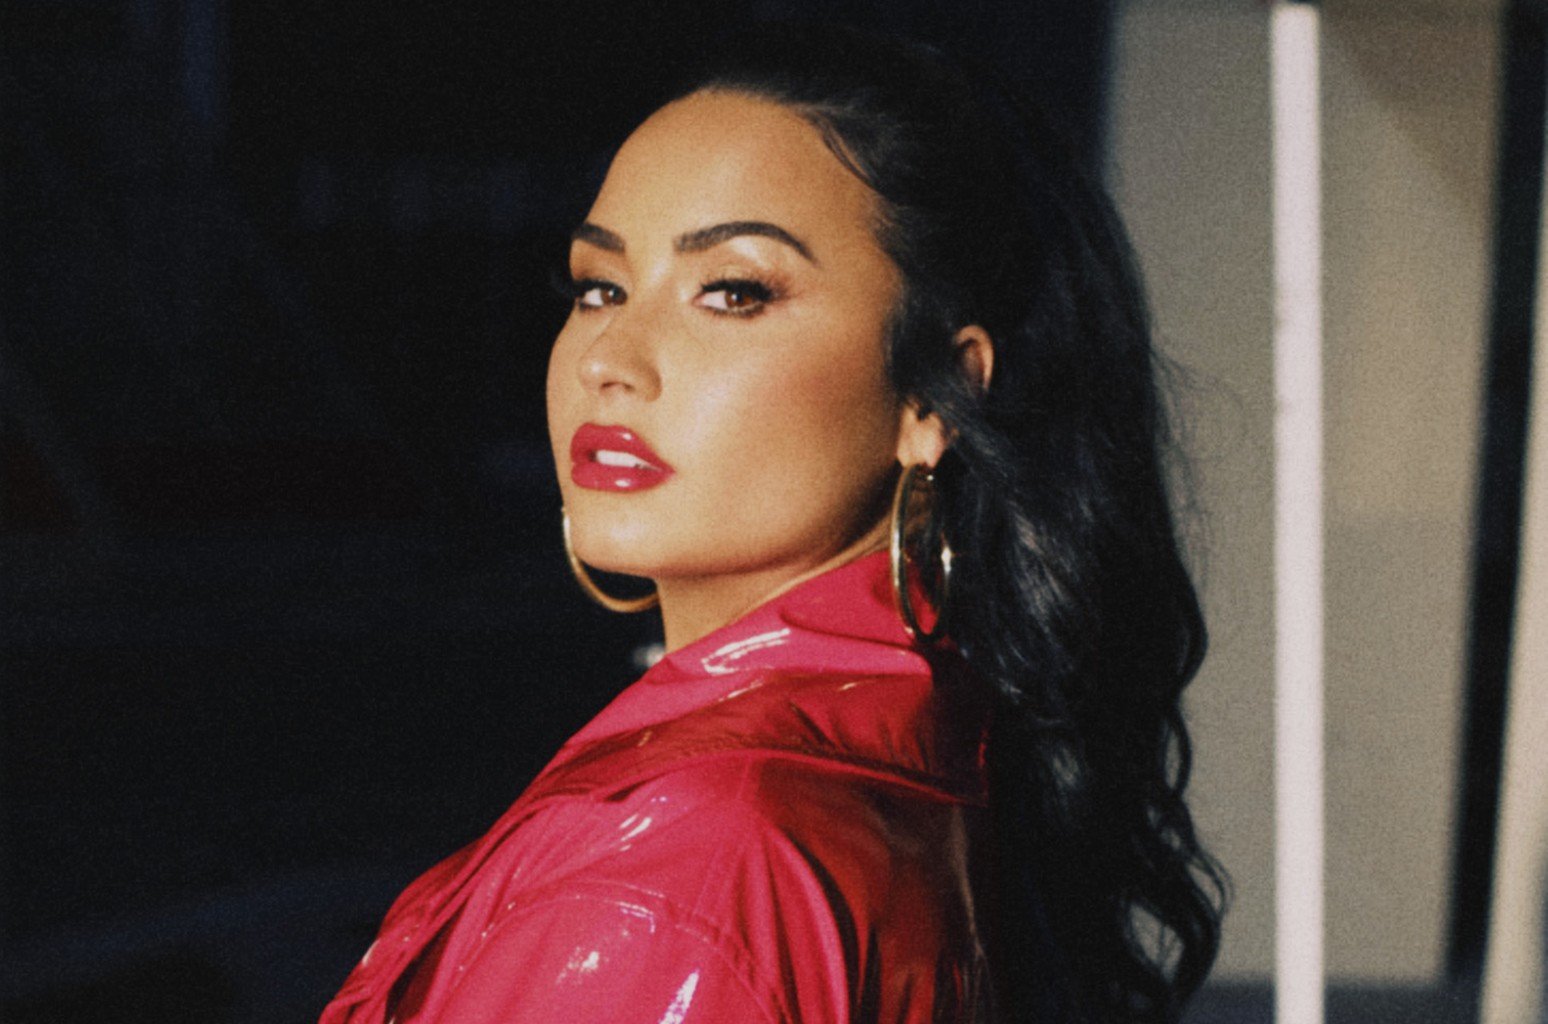 10 Times Demi Lovato Opened Up About Her Most Vulnerable Moments